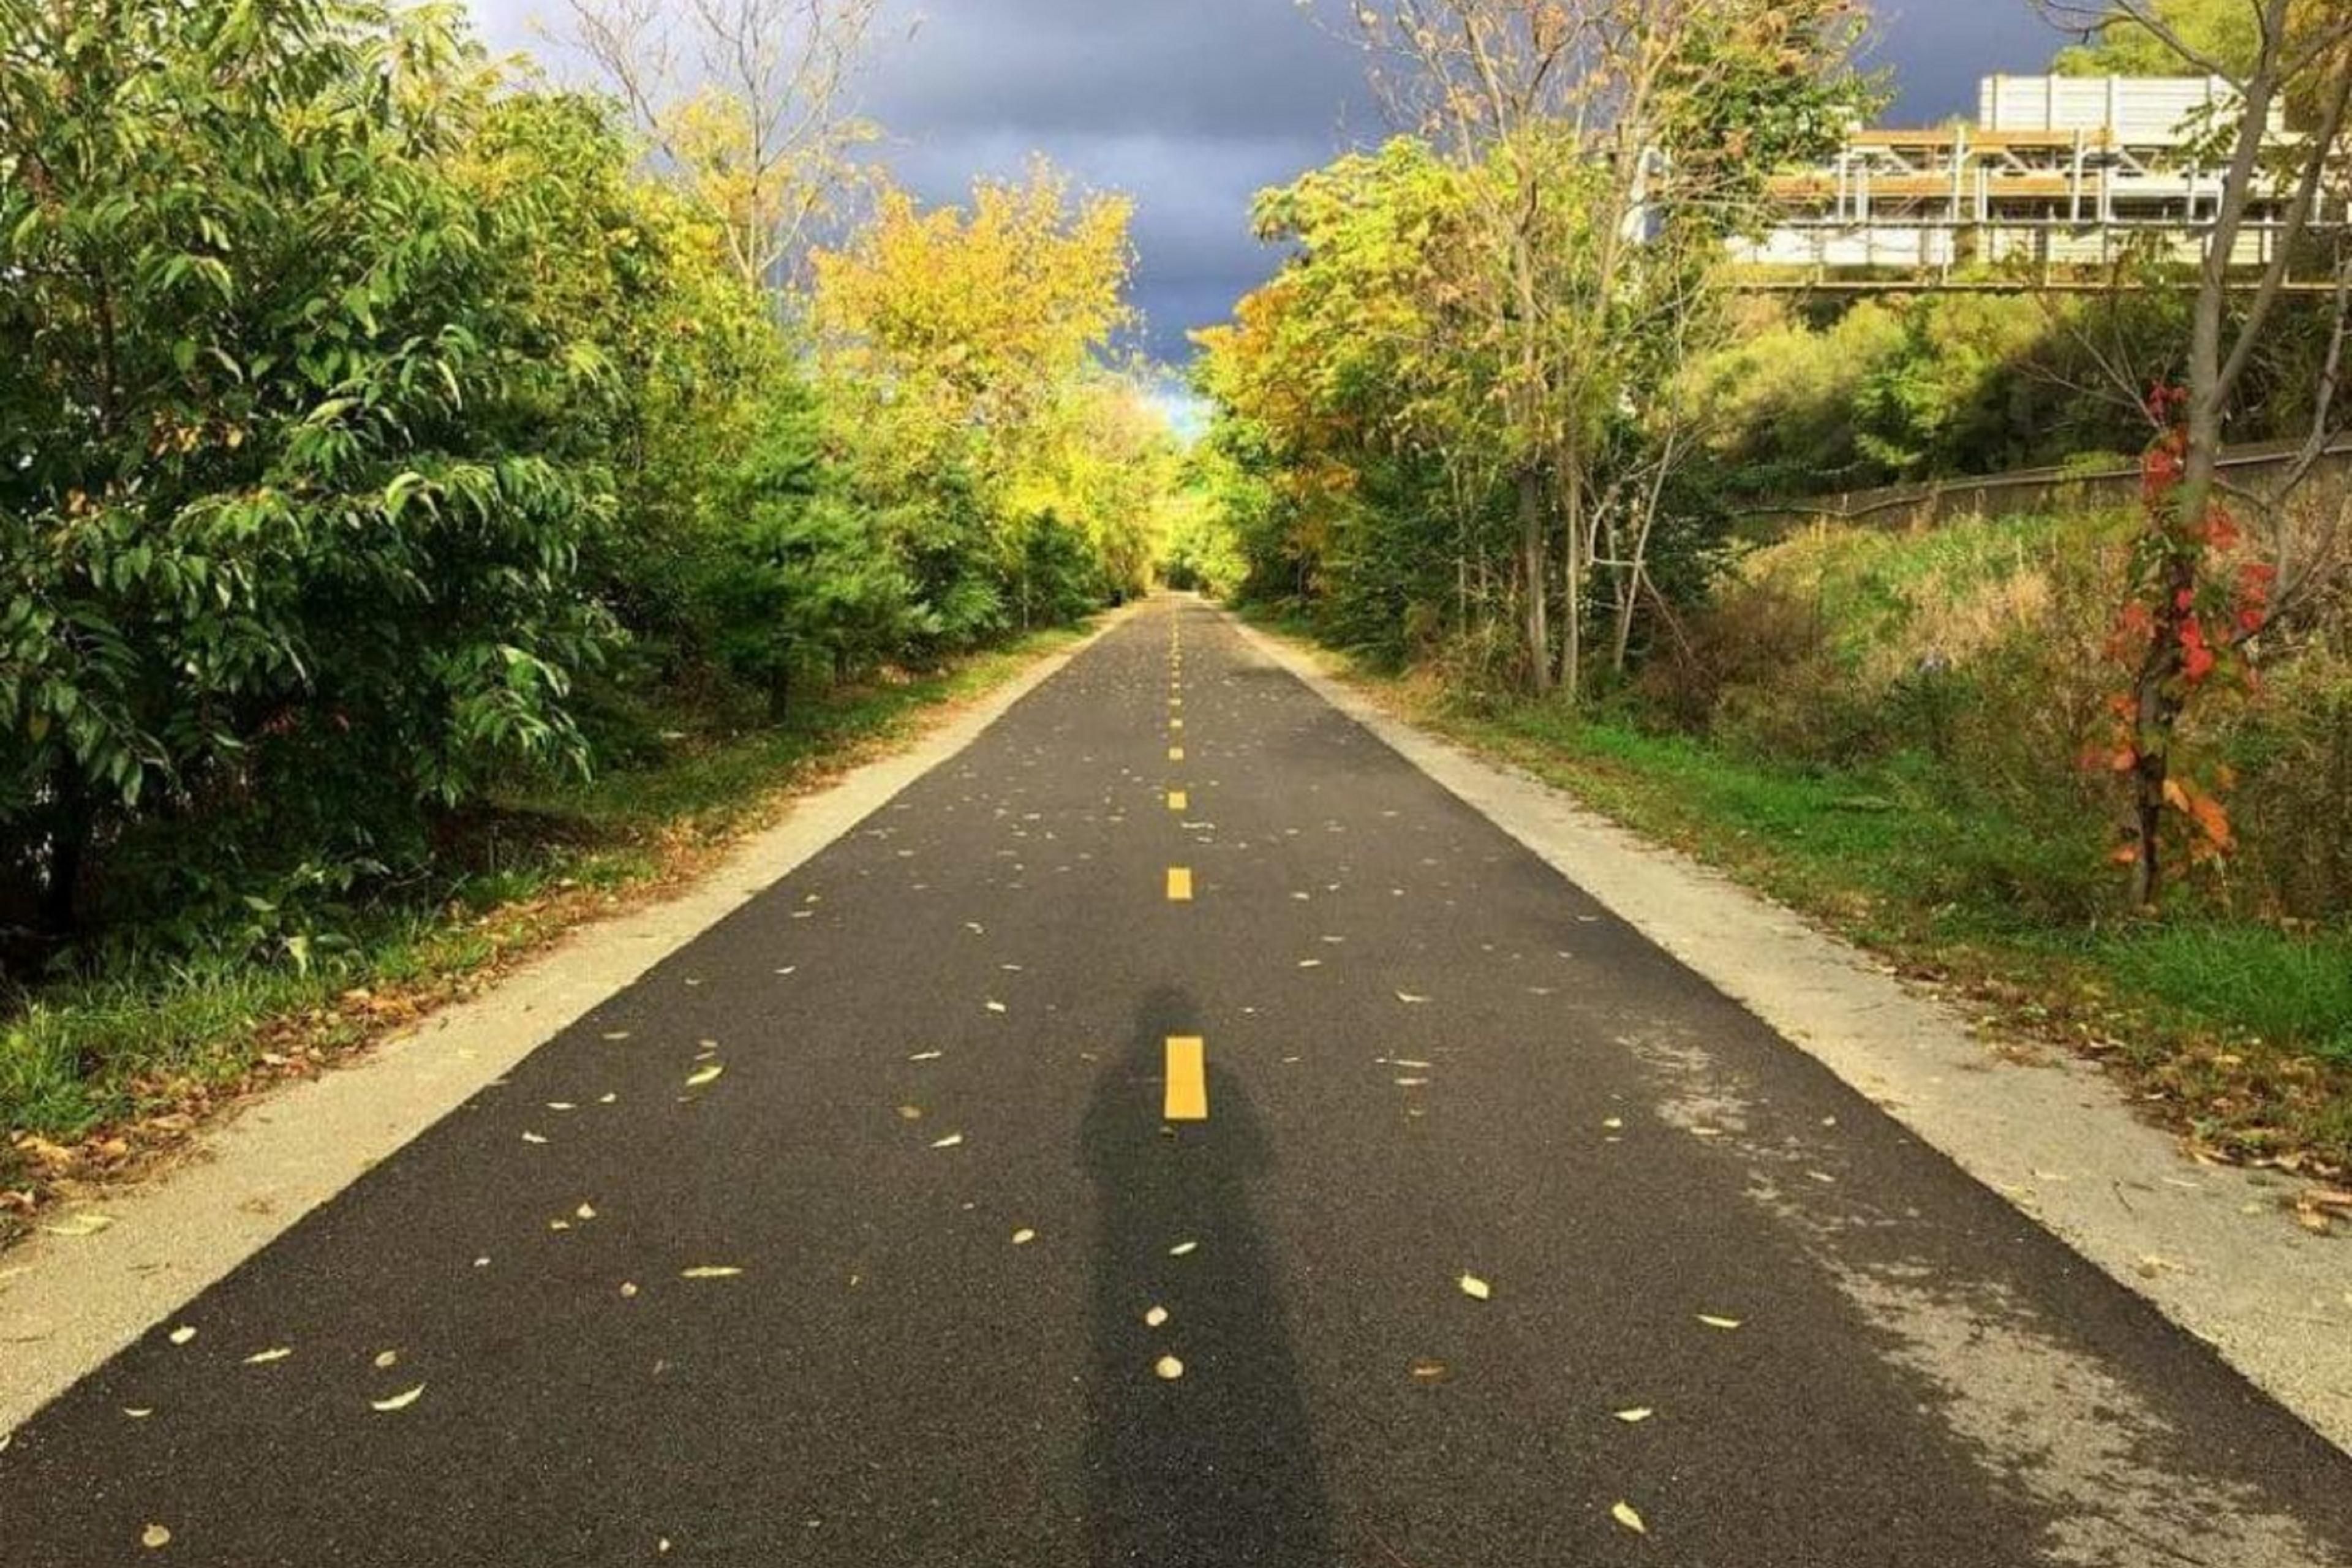 The Three Rivers Heritage Trail is a combination of the best biking trails throughout the city. A scenic, 24-mile paved trail along the Pittsburgh riverfront used for walking, running, and biking. Eliza Furnace Trail conveniently runs directly alongside Hotel Indigo Pittsburgh University Oakland.